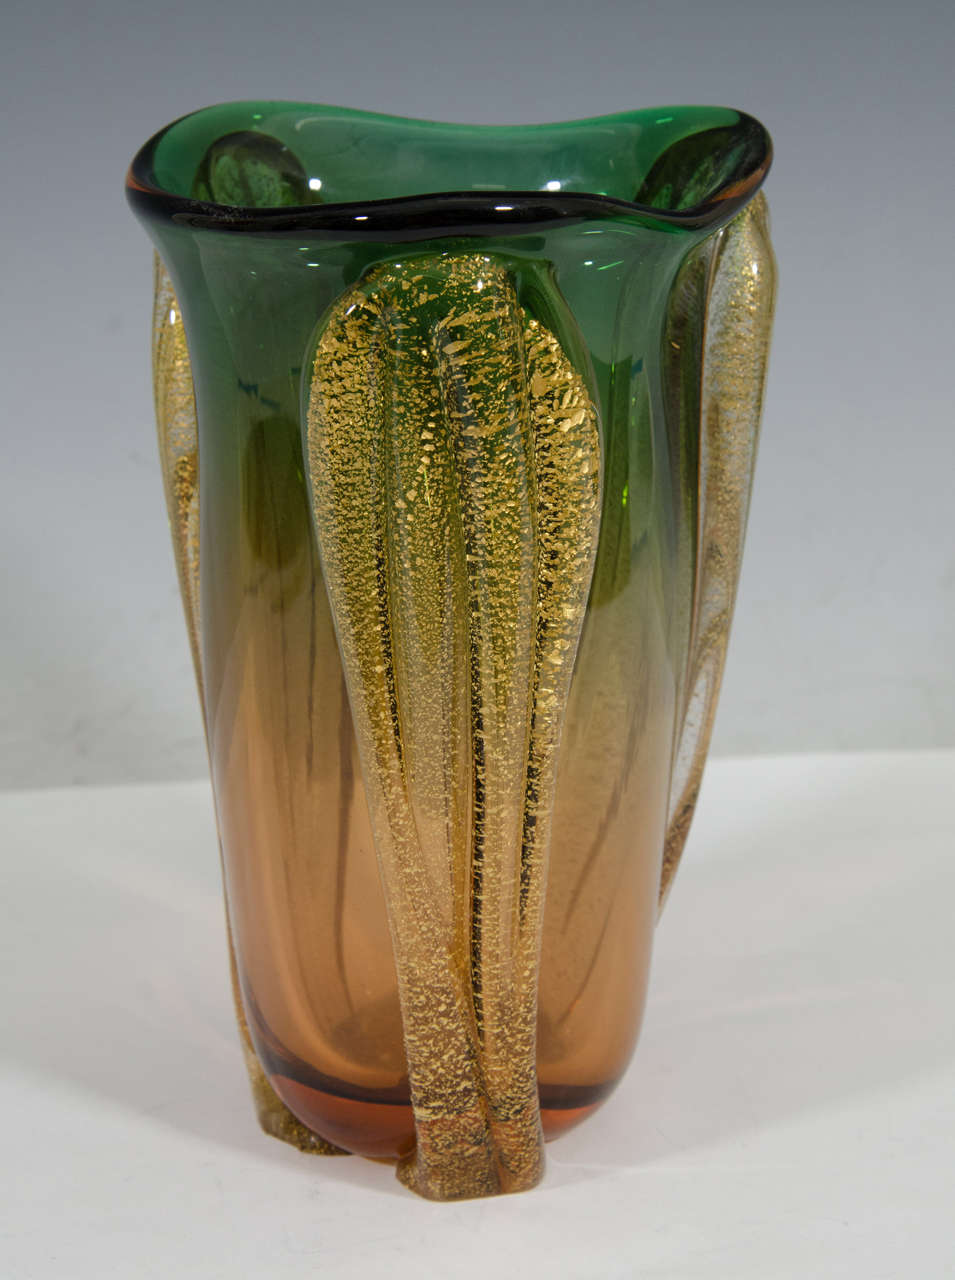 Midcentury Murano Glass Vase In Green And Amber With Gold Leaf For Sale At 1stdibs